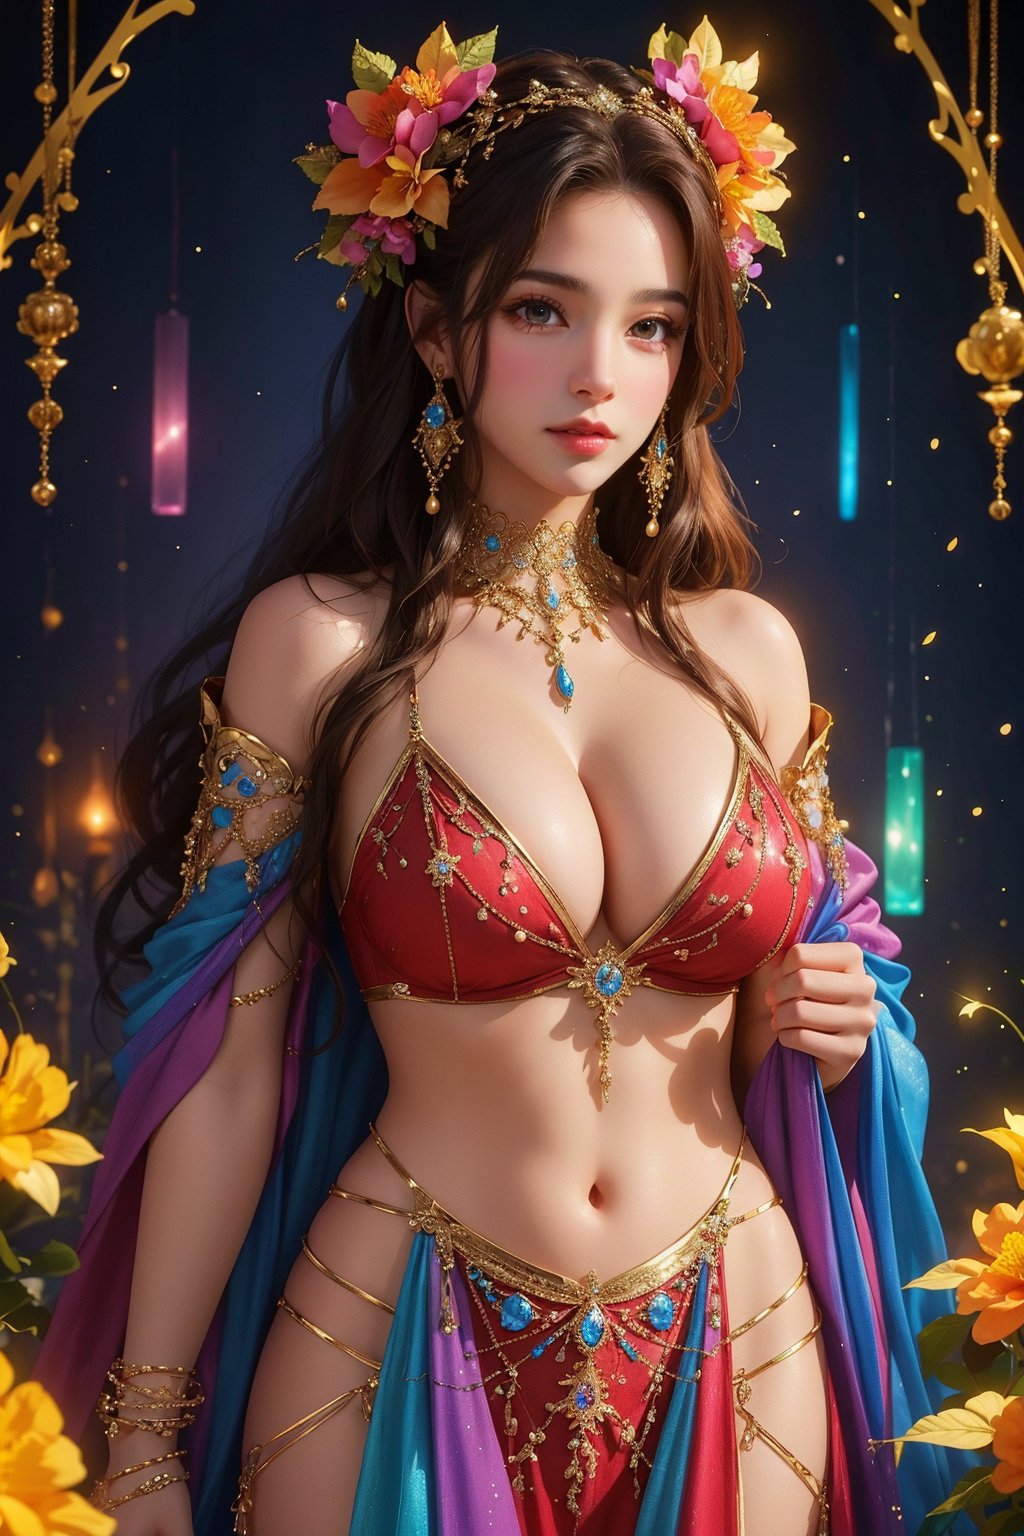  busty and sexy girl, 8k, masterpiece, ultra-realistic, best quality, high resolution, high definition, A stunning sorceress, enveloped in prisms of color, is adorned in her most exquisite attire and her finest jewels, colorful glowing flower